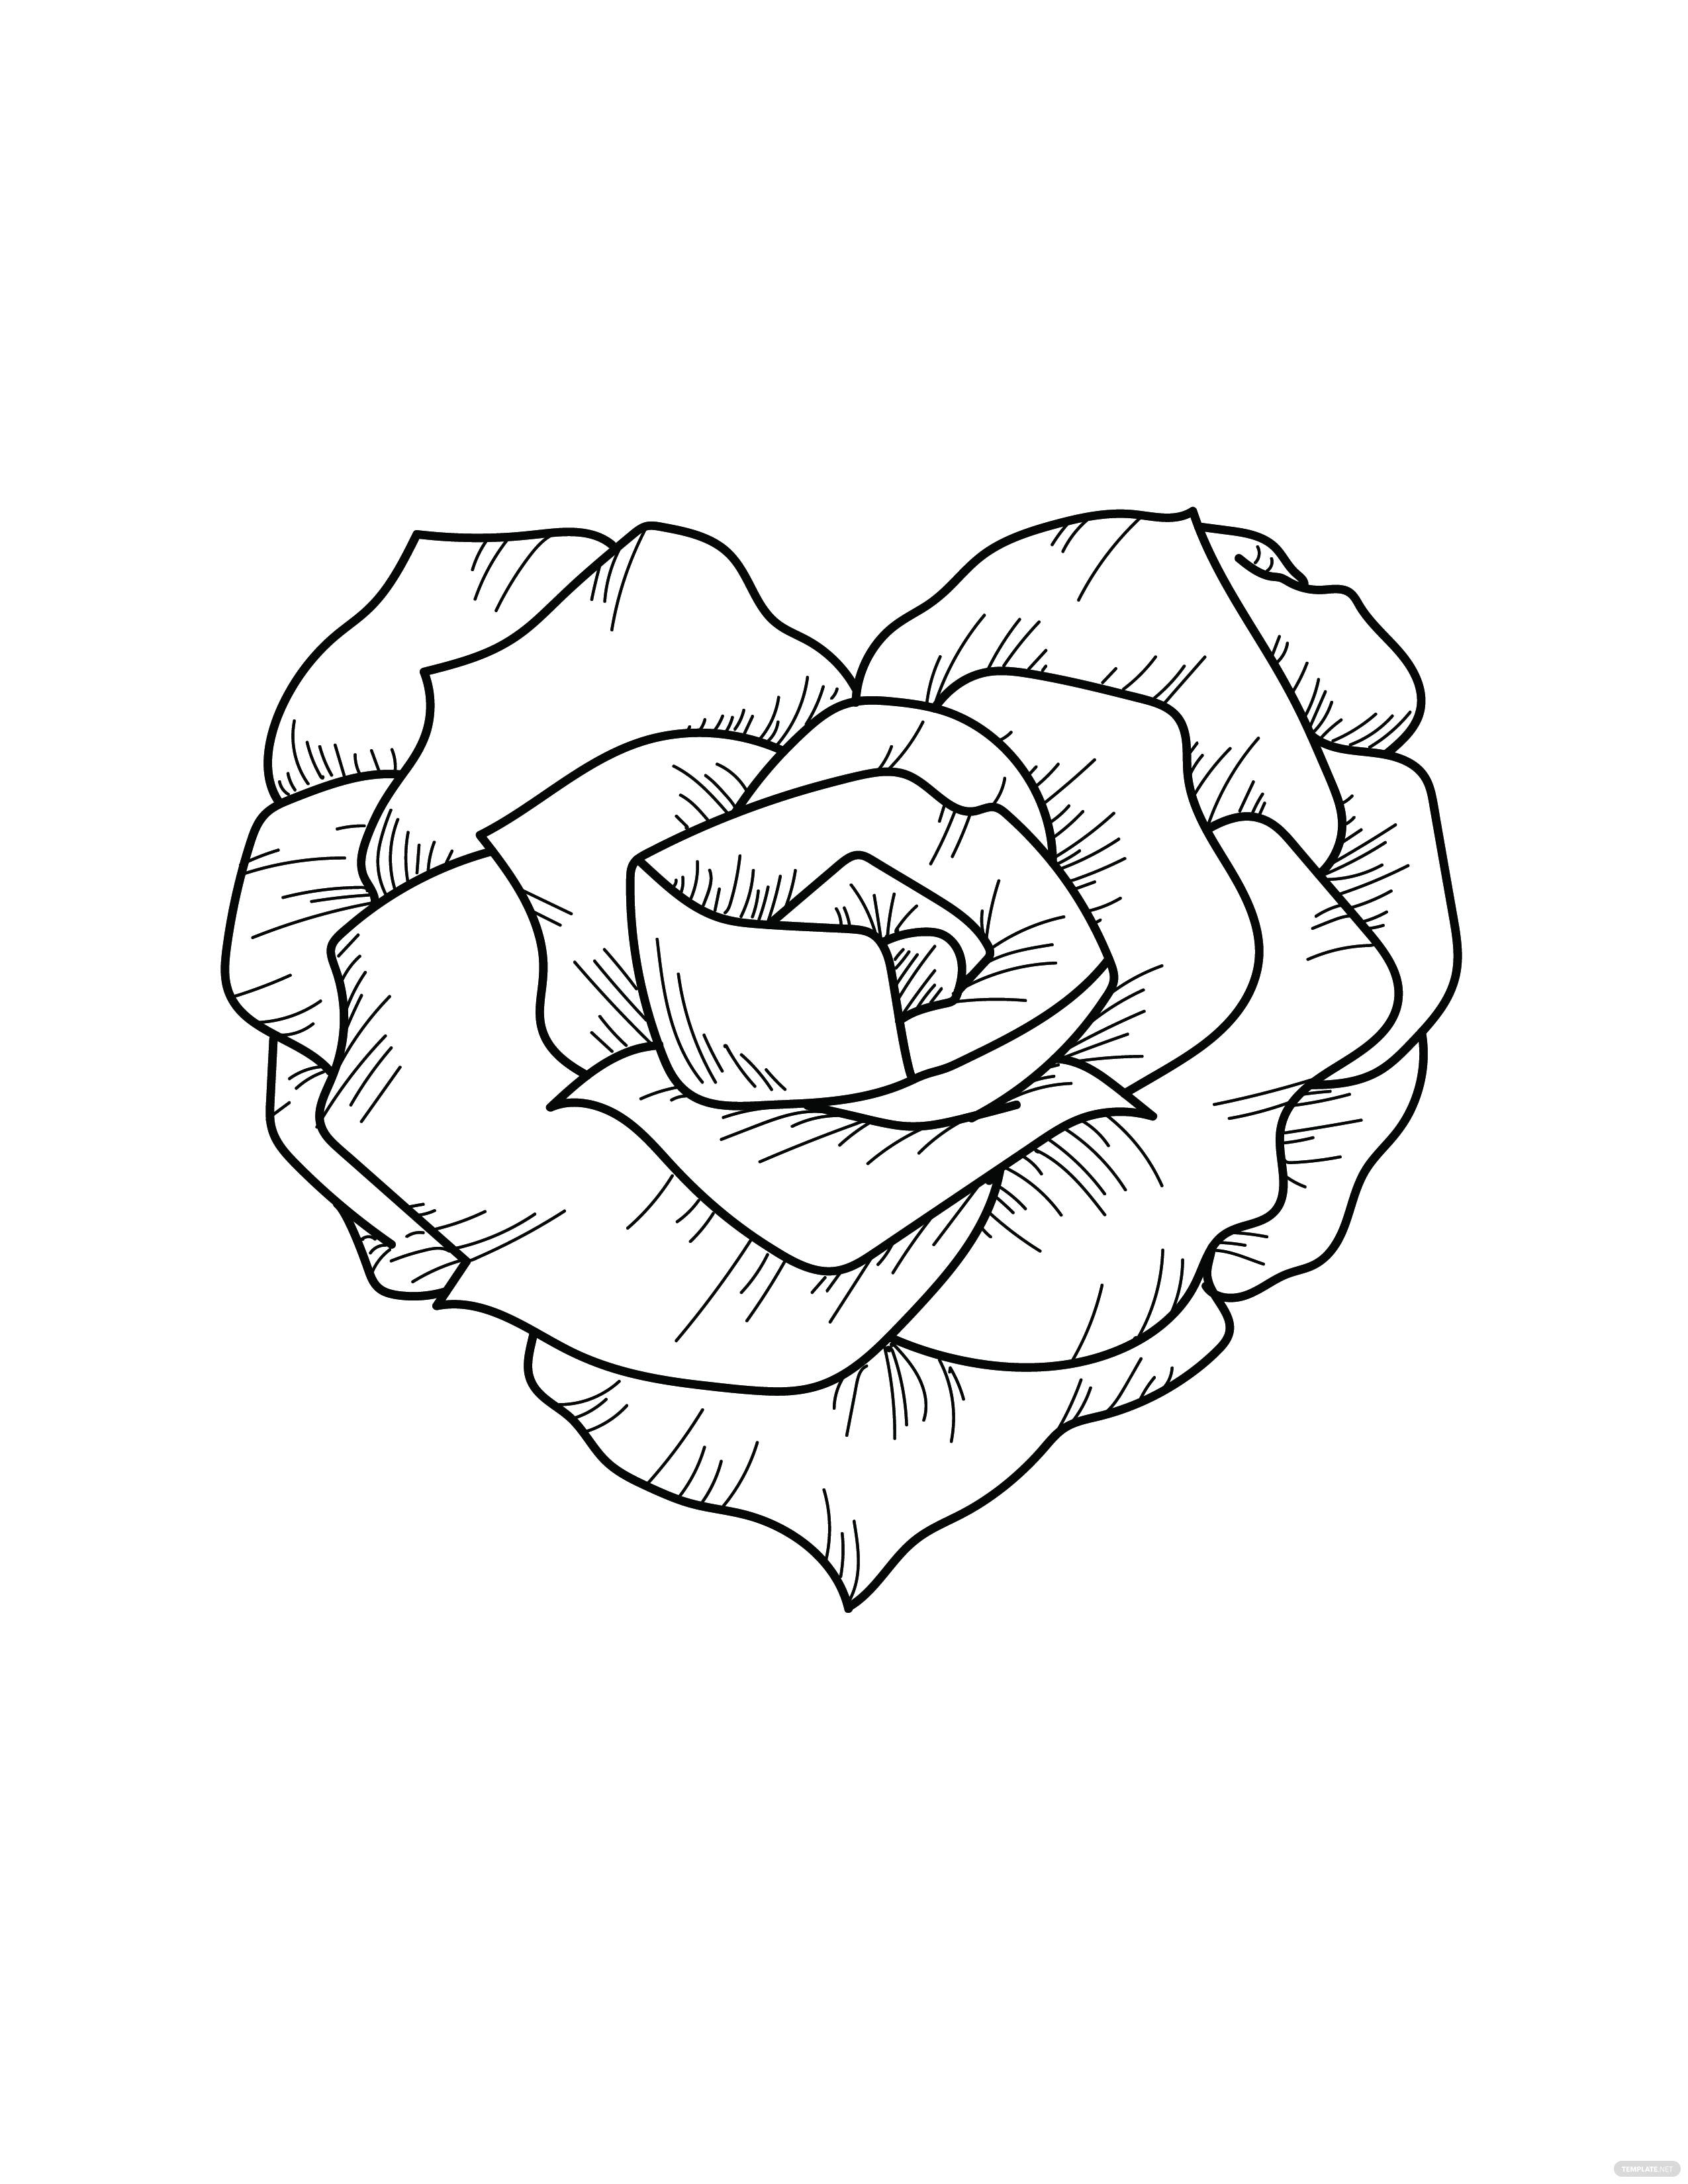 Free Heart Shaped Rose Coloring Page - EPS, Illustrator, JPG, PNG, PDF, SVG  | Template.net